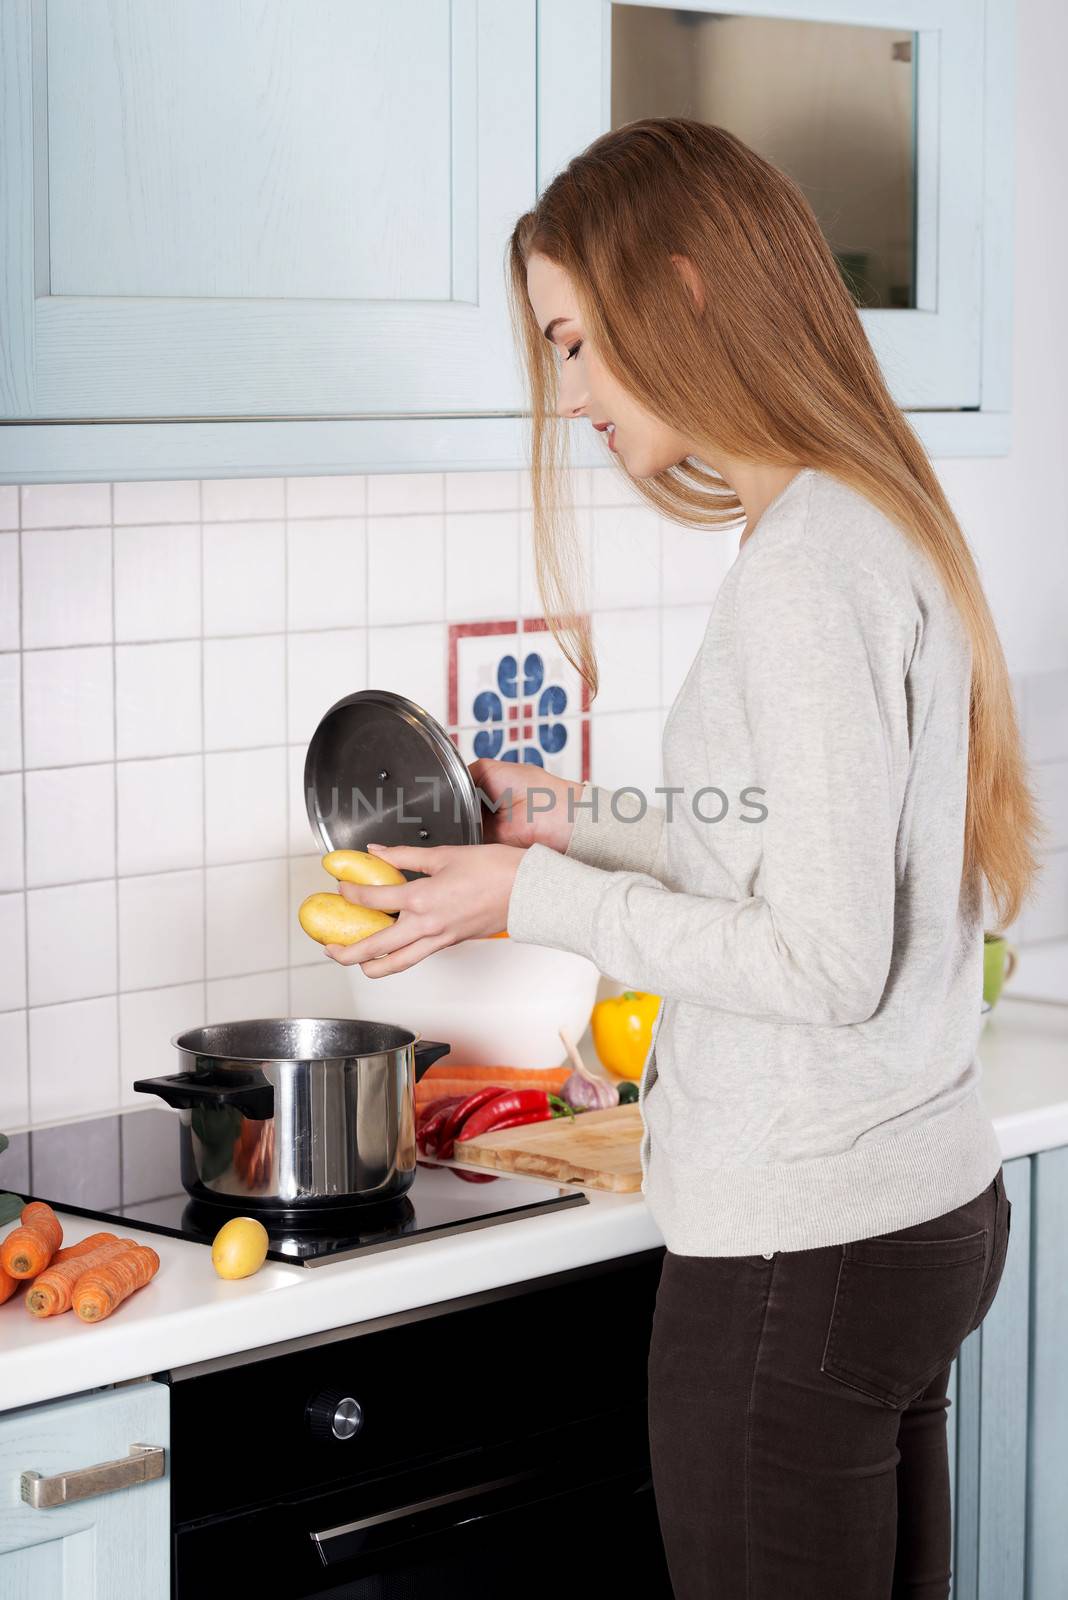 Beautiful young woman standing in the kitchen and preparing food.